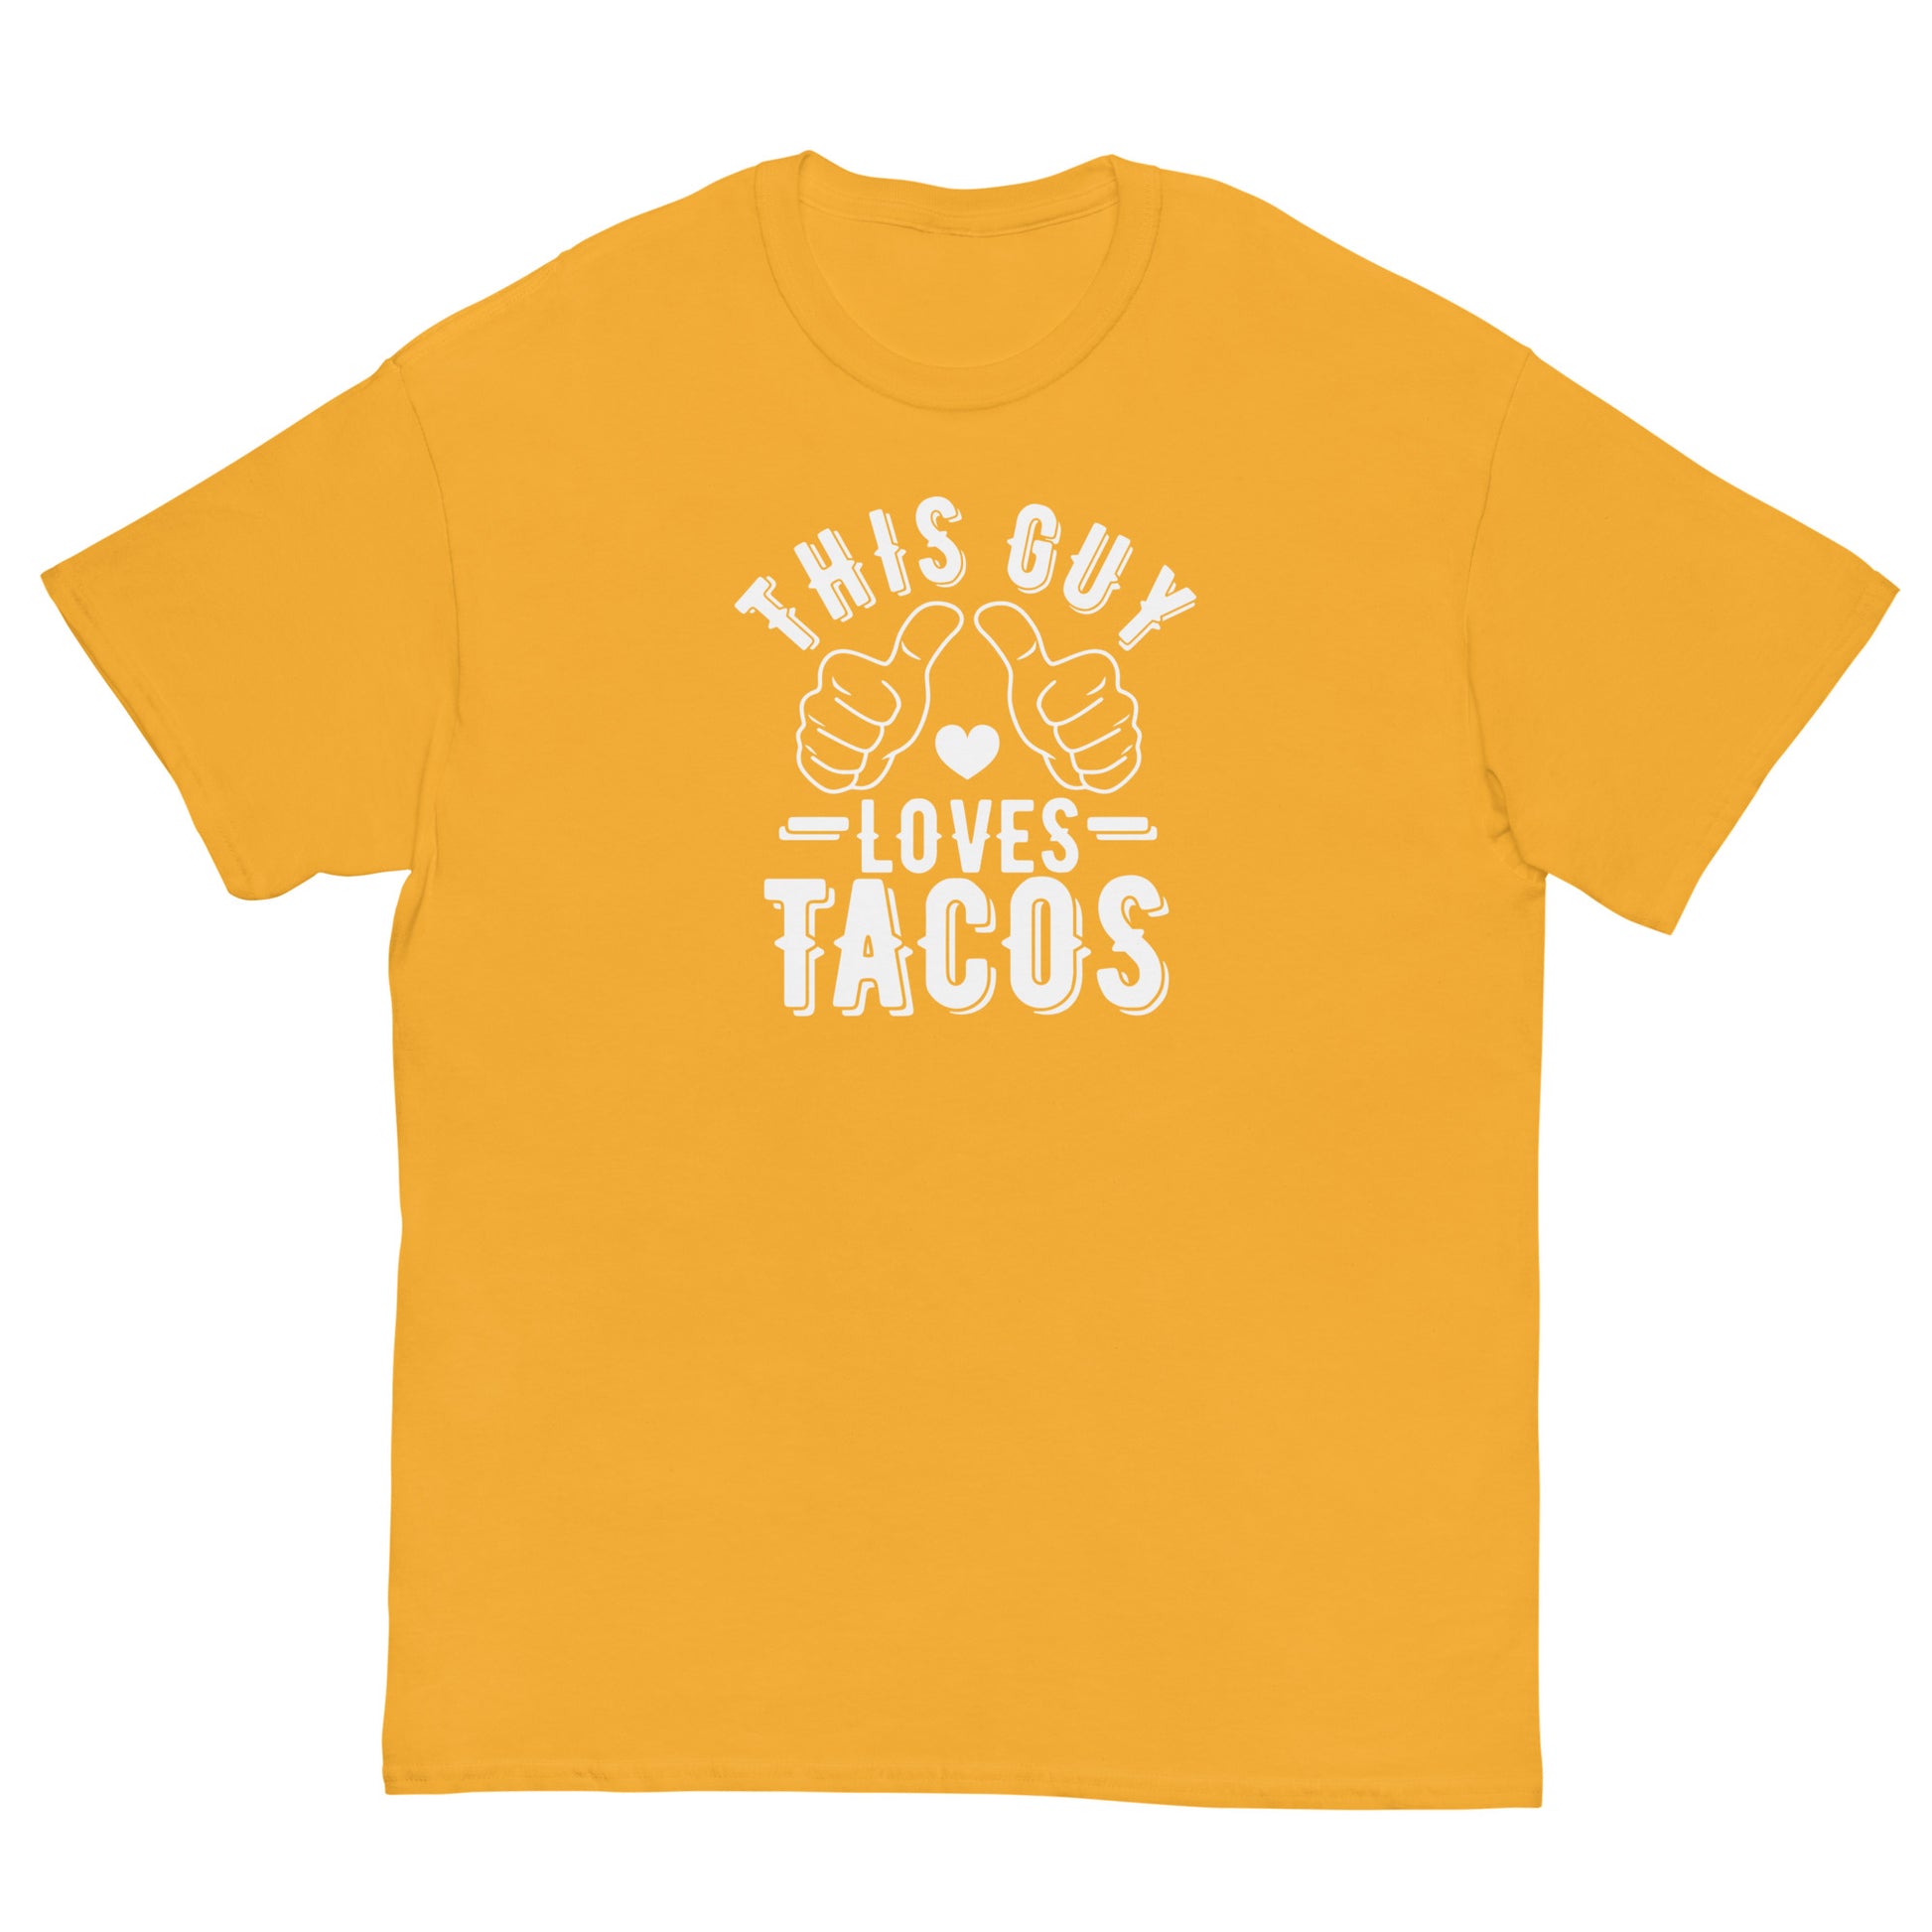 "This Guy Loves Tacos" T-Shirt - Weave Got Gifts - Unique Gifts You Won’t Find Anywhere Else!